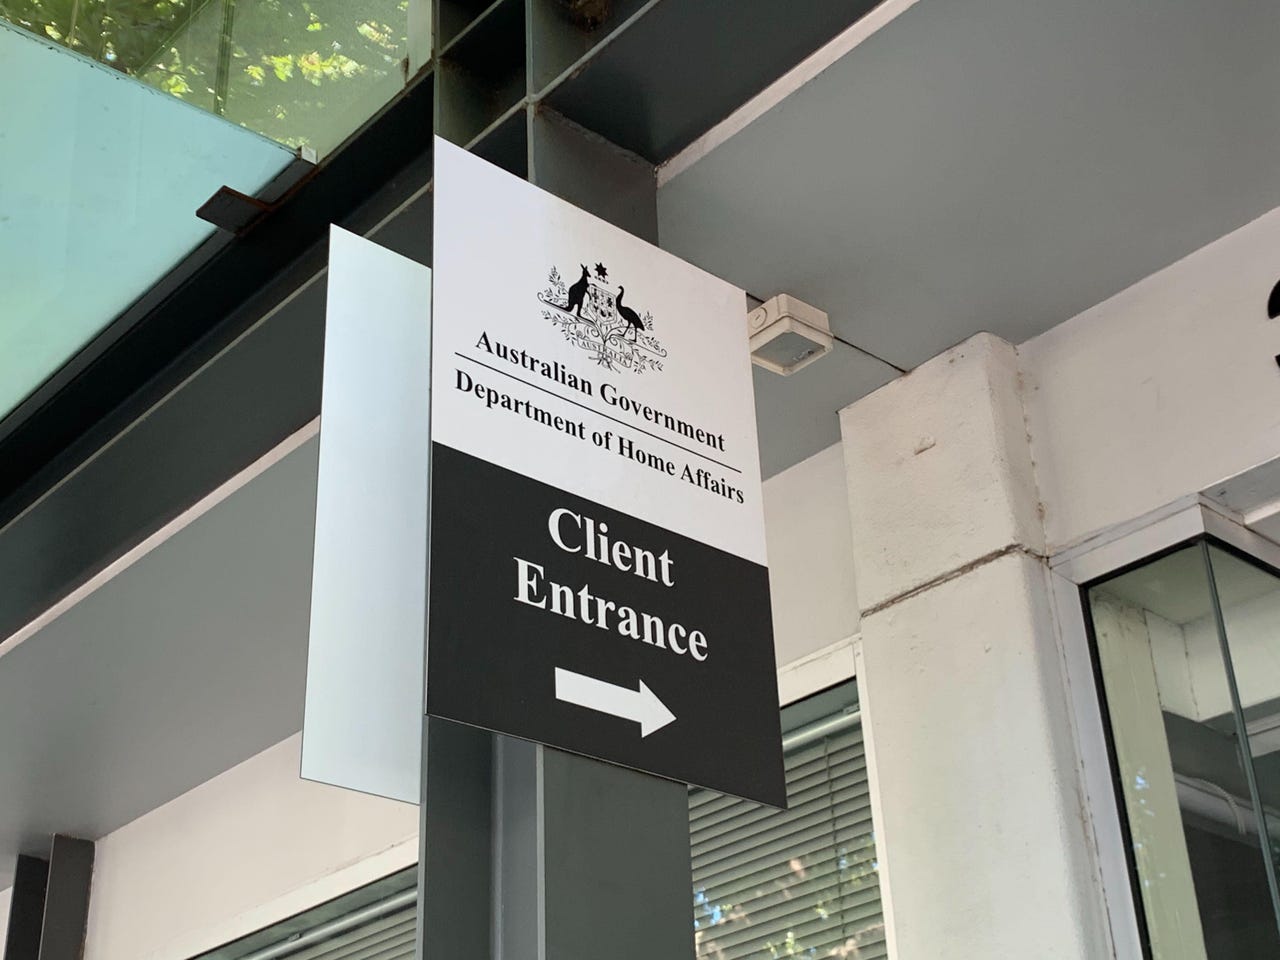 department-of-home-affairs-canberra-client-entrance-zoomed.jpg